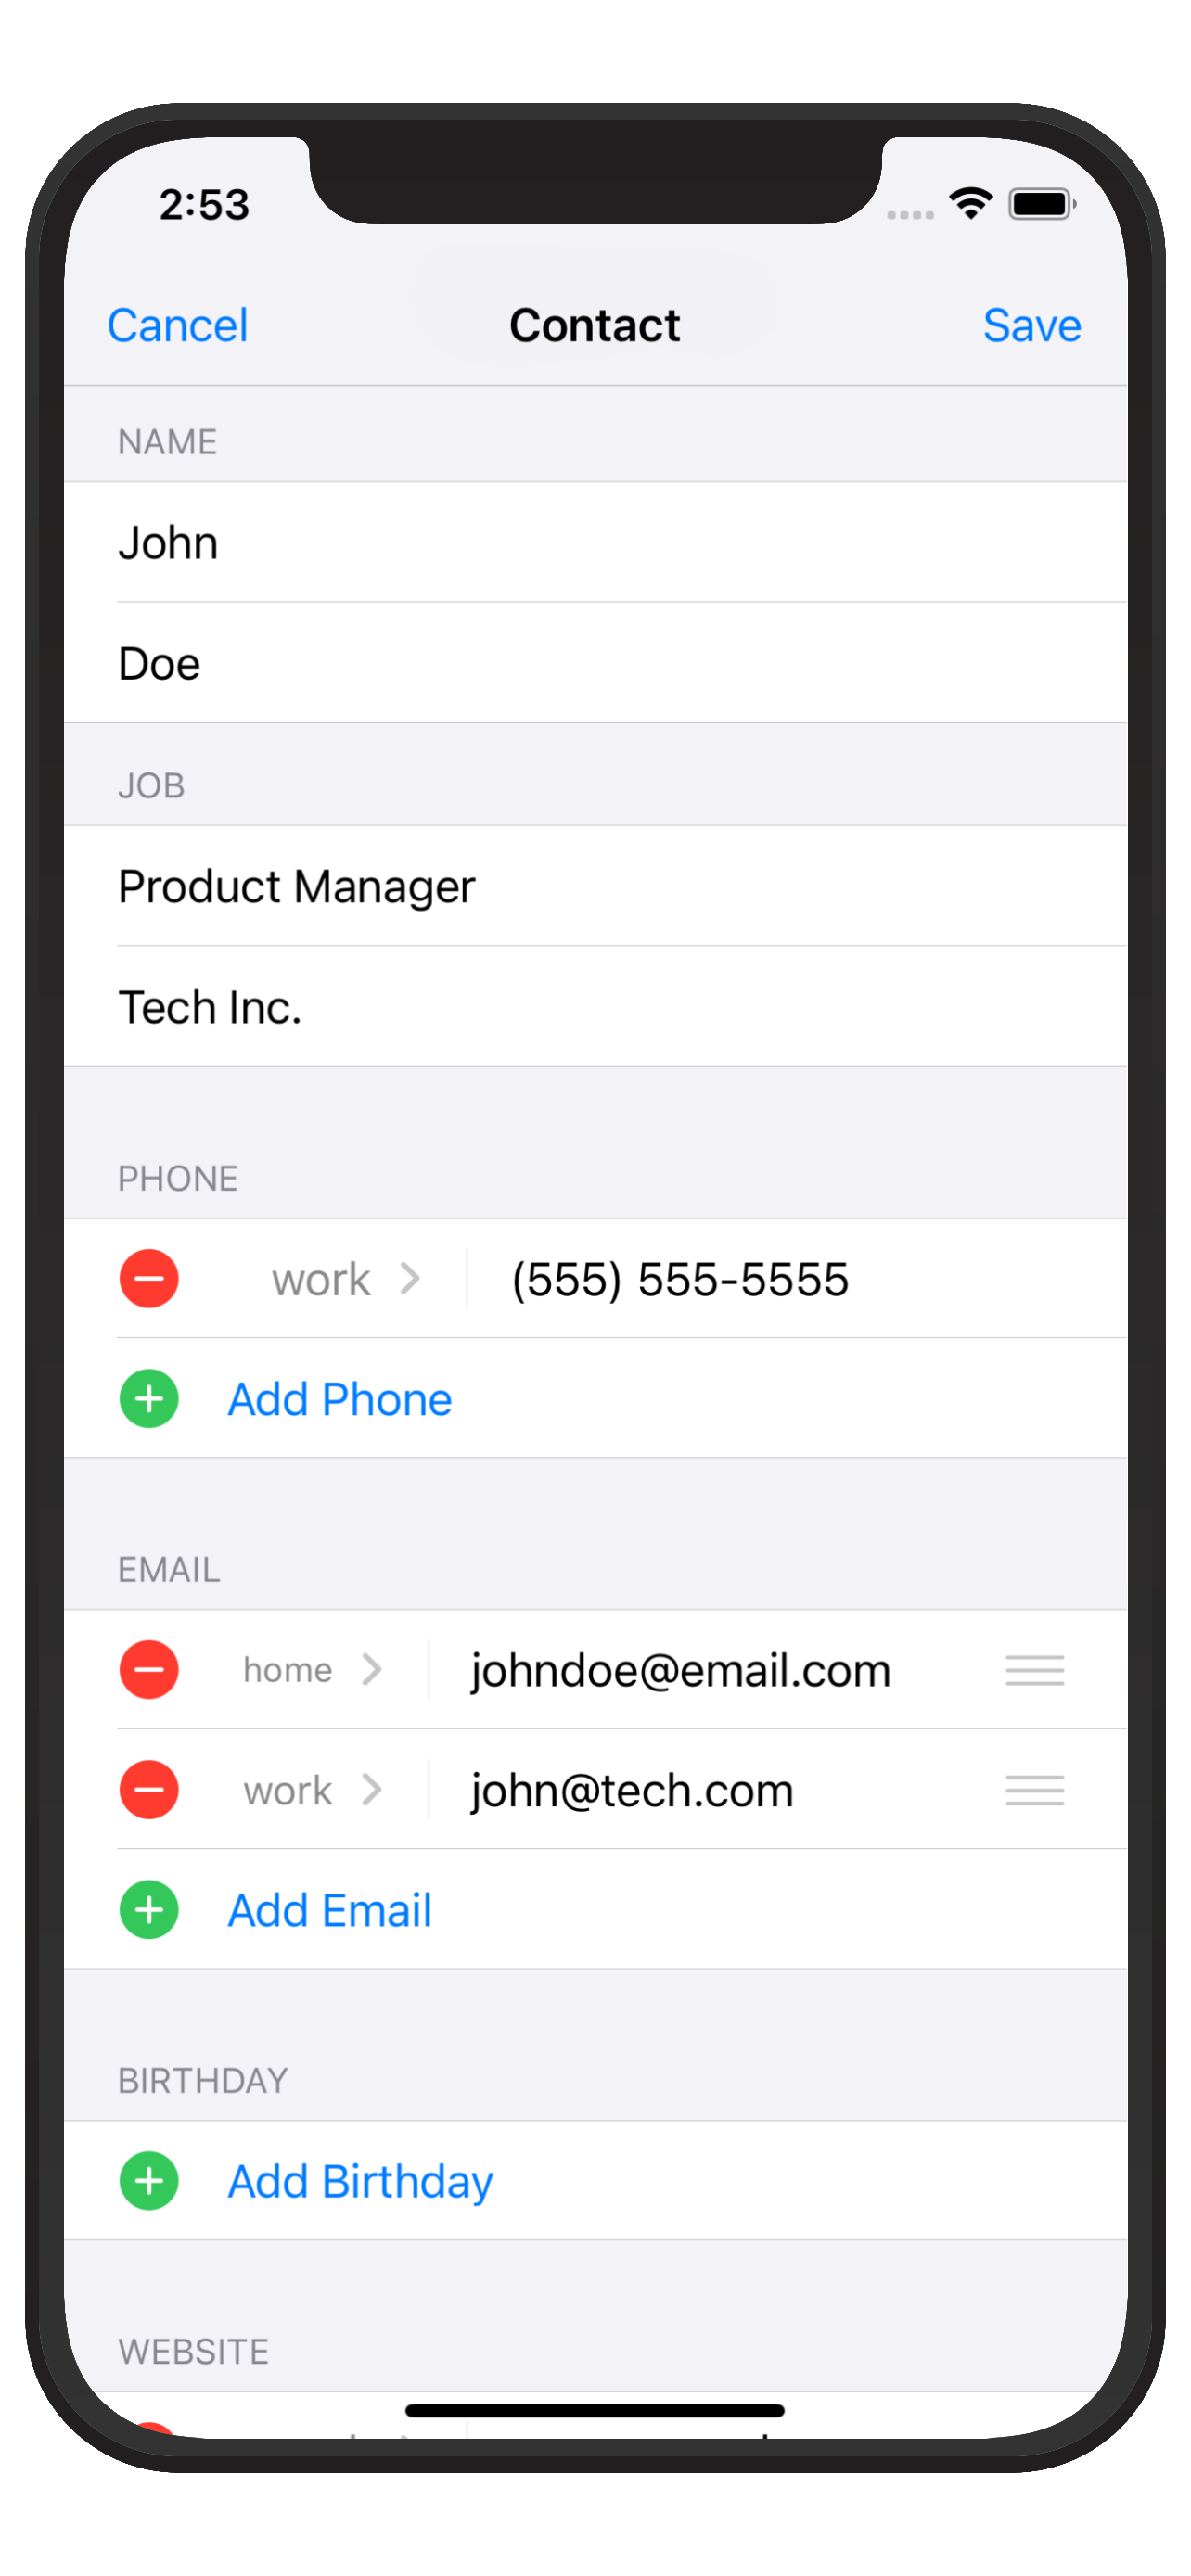 Screenshot of the contact input page on the app